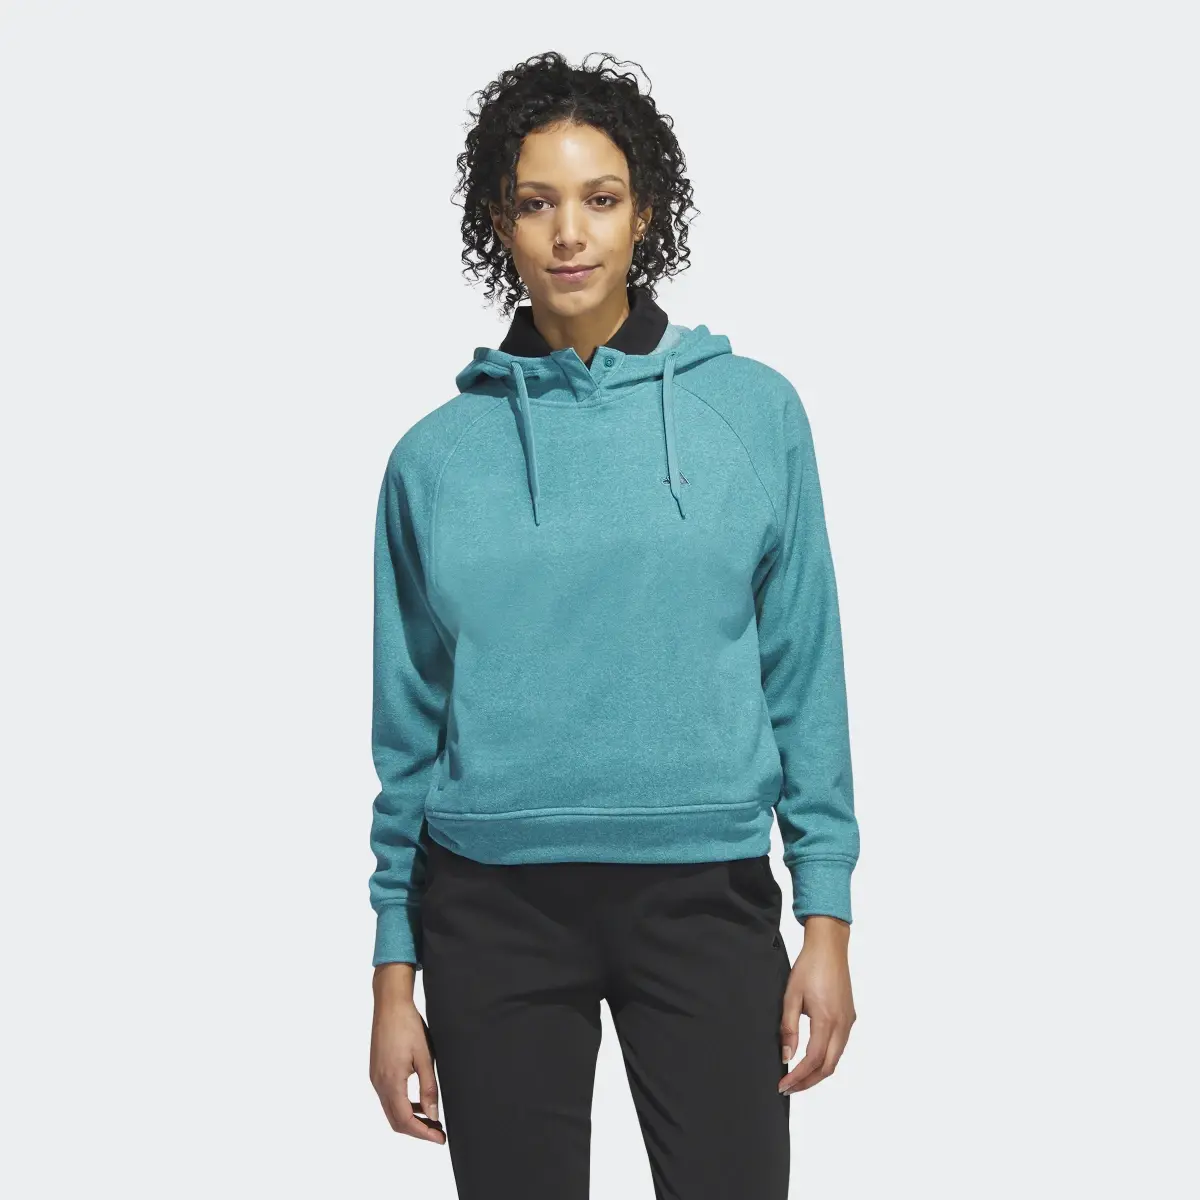 Adidas Go-To Hoodie. 2